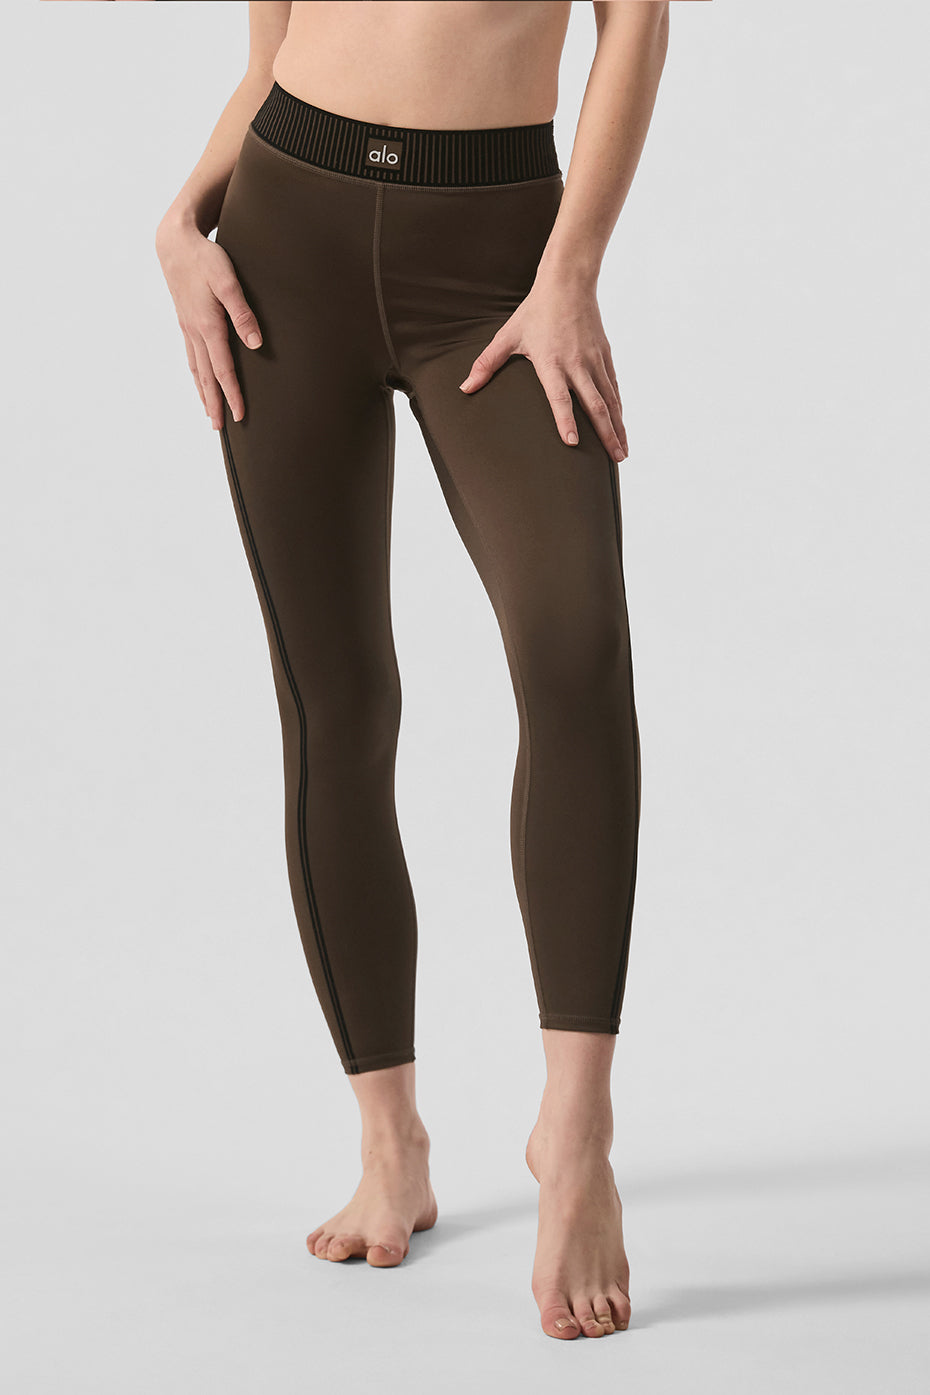 7/8 High-Waist Airlift Legging in Rust by Alo Yoga - Work Well Daily